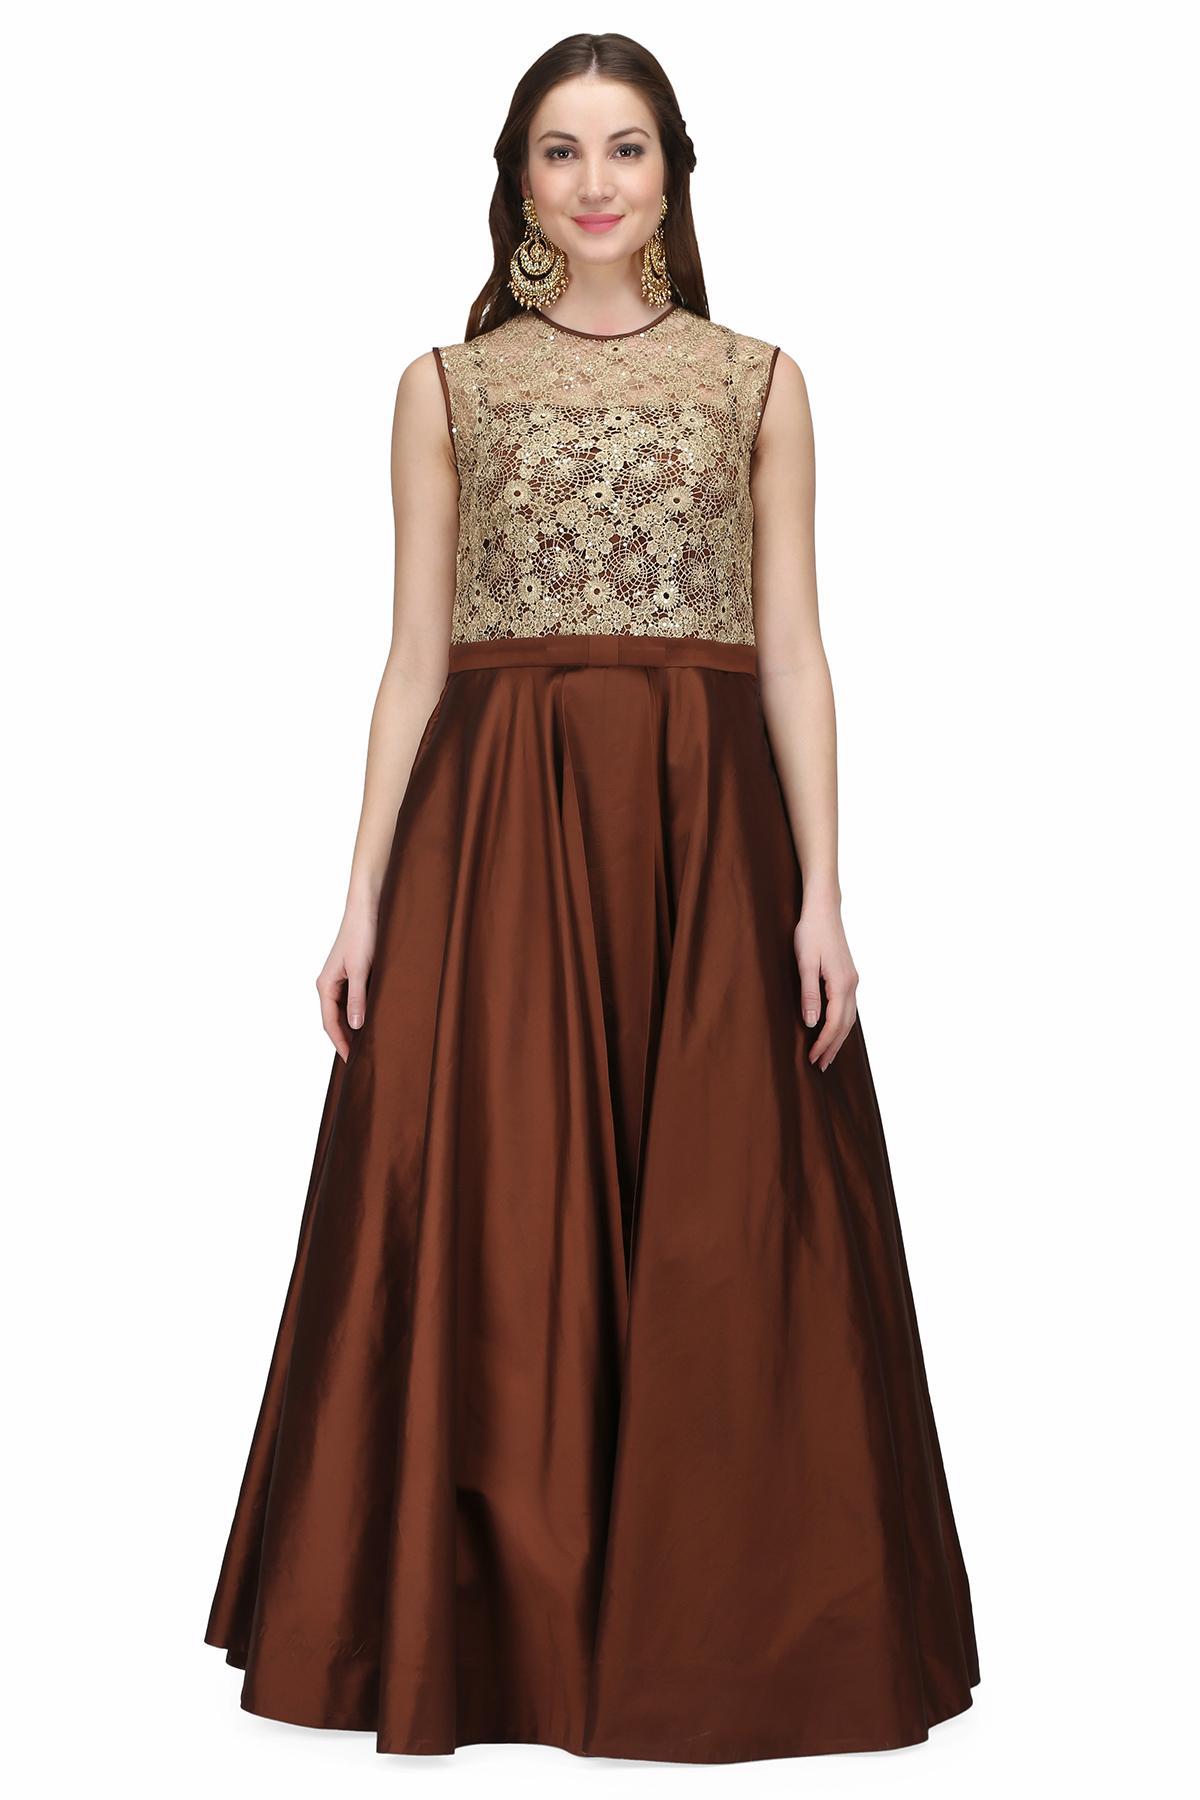 Biba Coffee Brown & Off White Floral Maxi Dress Price in India, Full  Specifications & Offers | DTashion.com